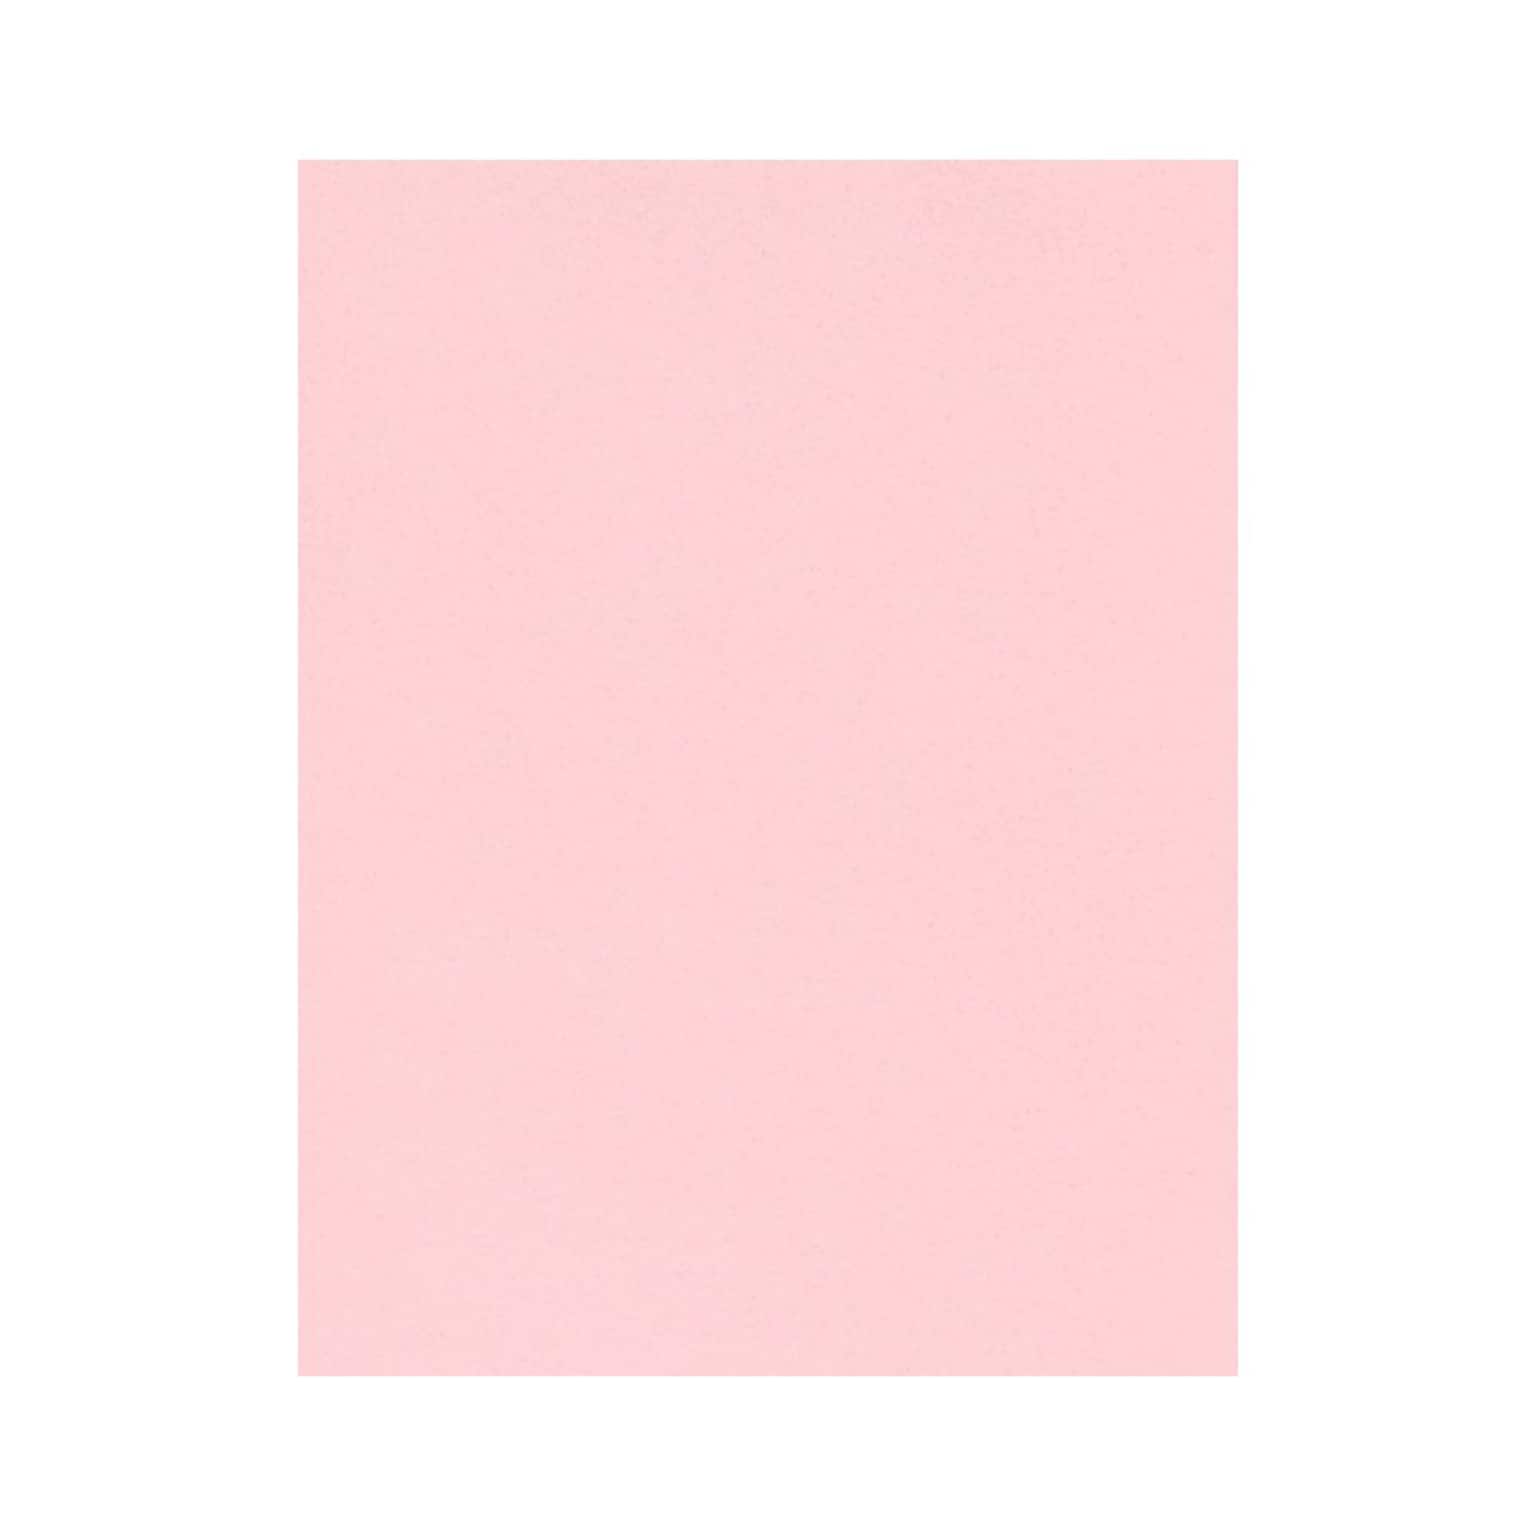 Lux Cardstock 8.5 x 11 inch Candy Pink 50/Pack